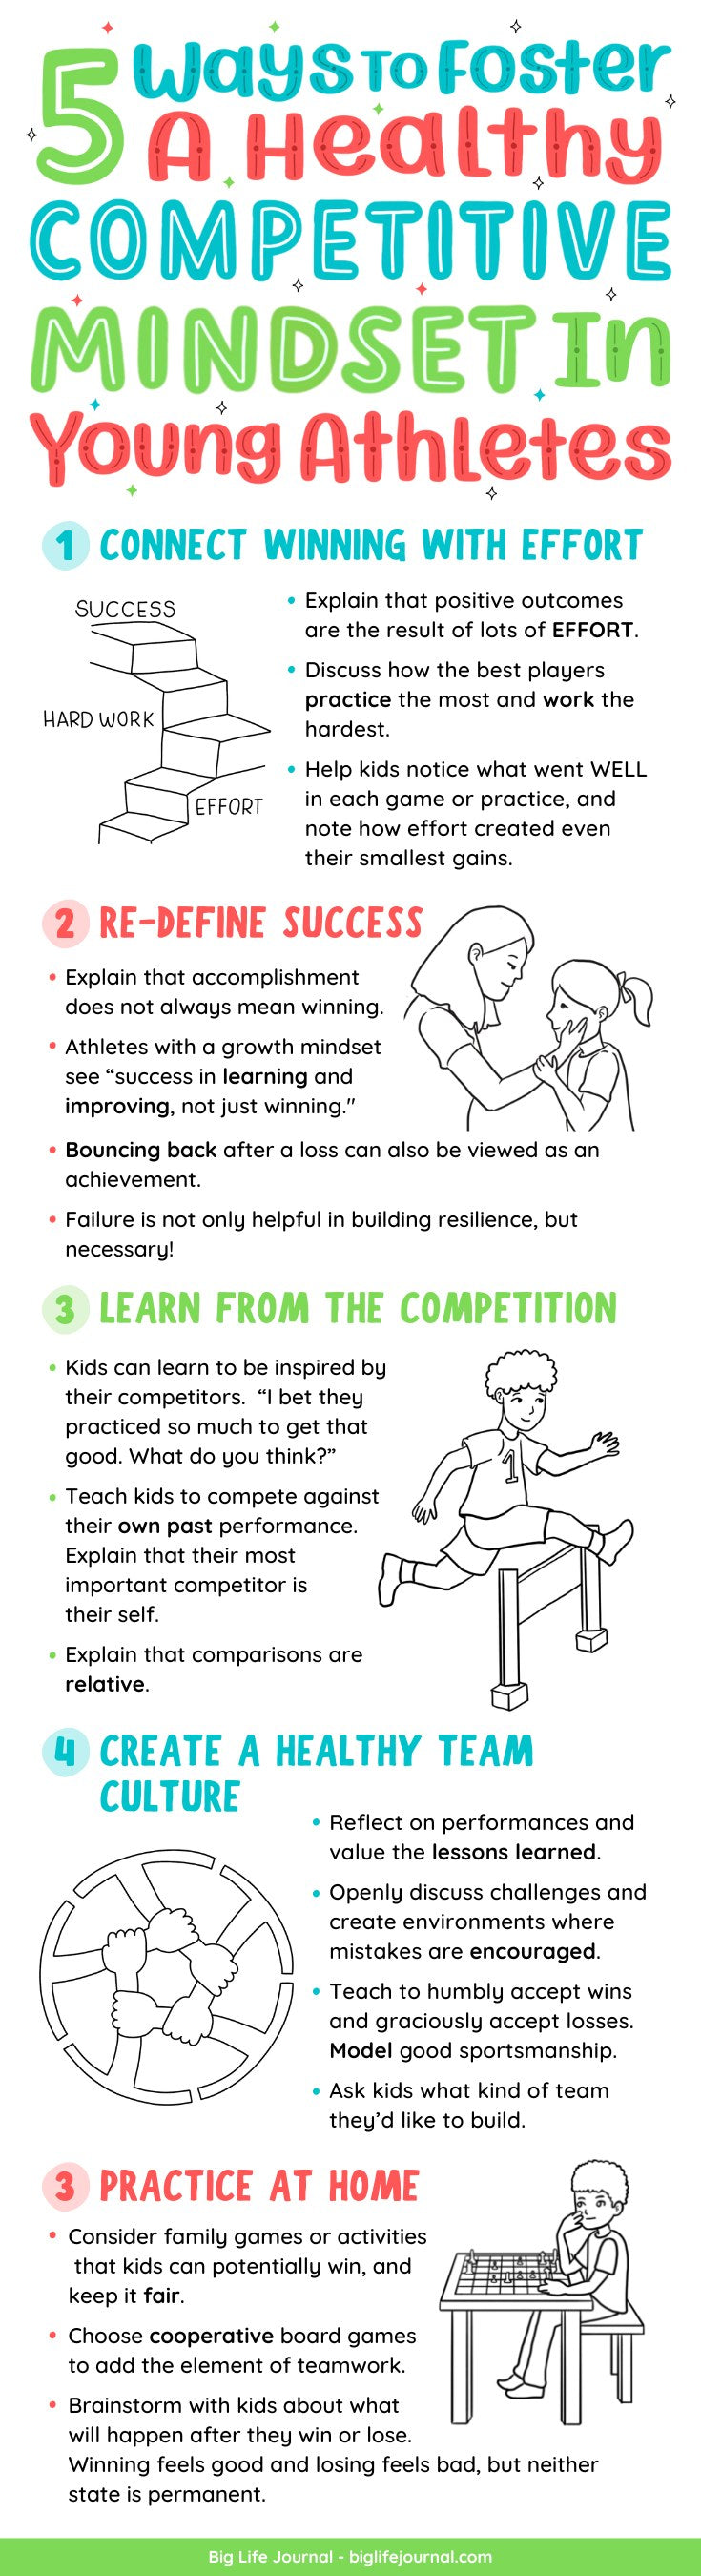 5 Ways to Foster a Healthy Competitive Mindset in Young Athletes